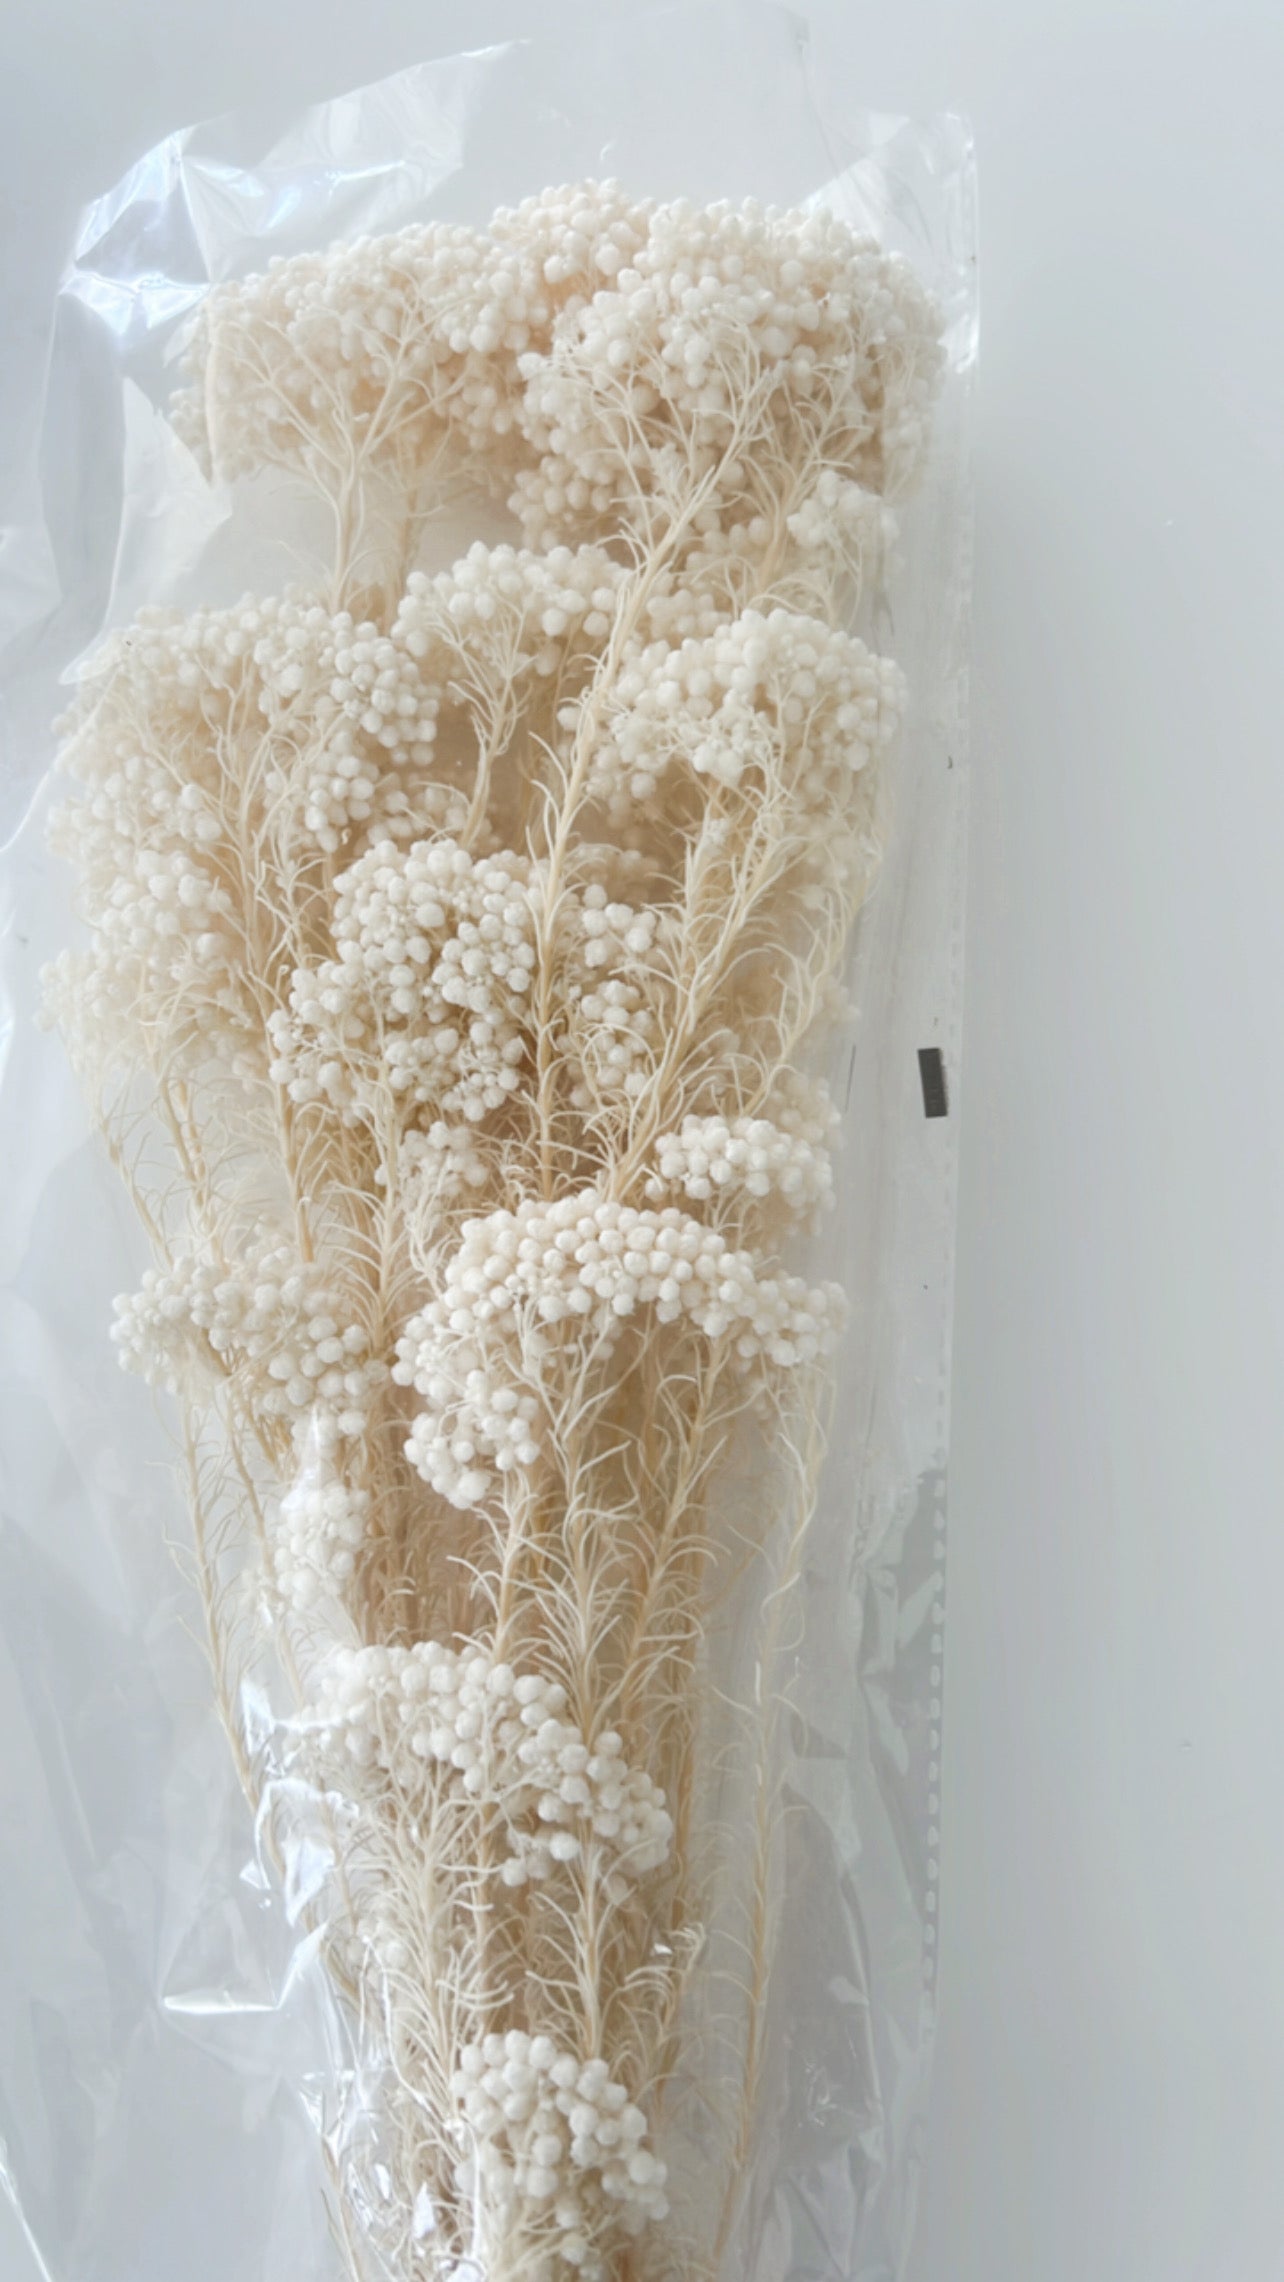 Dried rice flowers in white perfect for any dried floral arrangement 